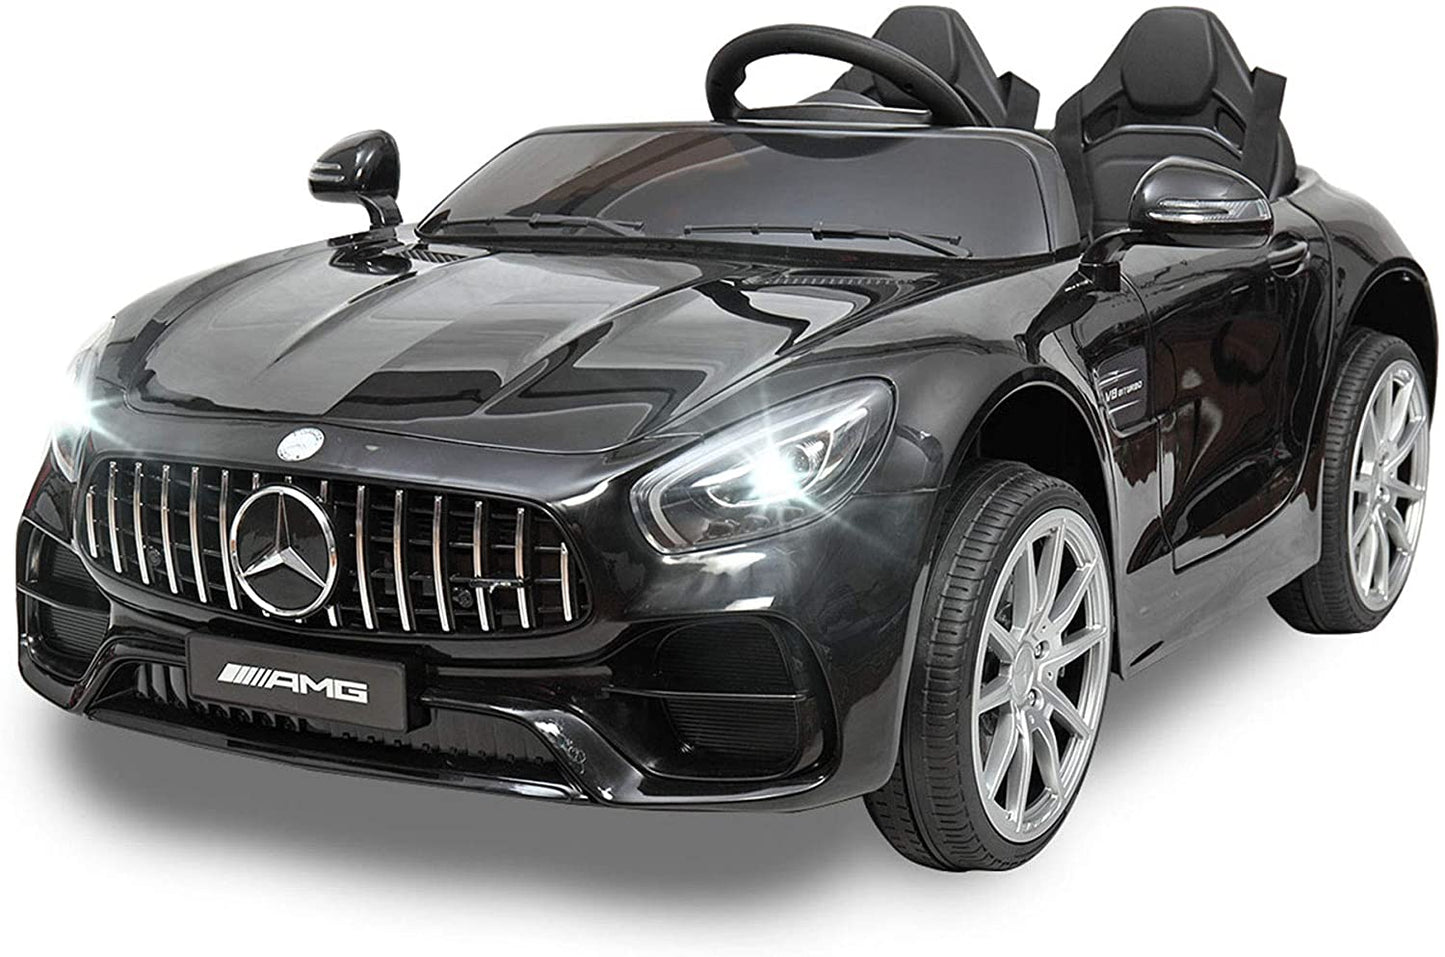 2 Seater Kids Ride On Car, Mercedes Benz Licensed Electric Car for Kids, Power Vehicle with Remote Control, 3 Speeds, LED Lights, MP3 Player, USB Port, Gift for Age 1-5 Years, K1396